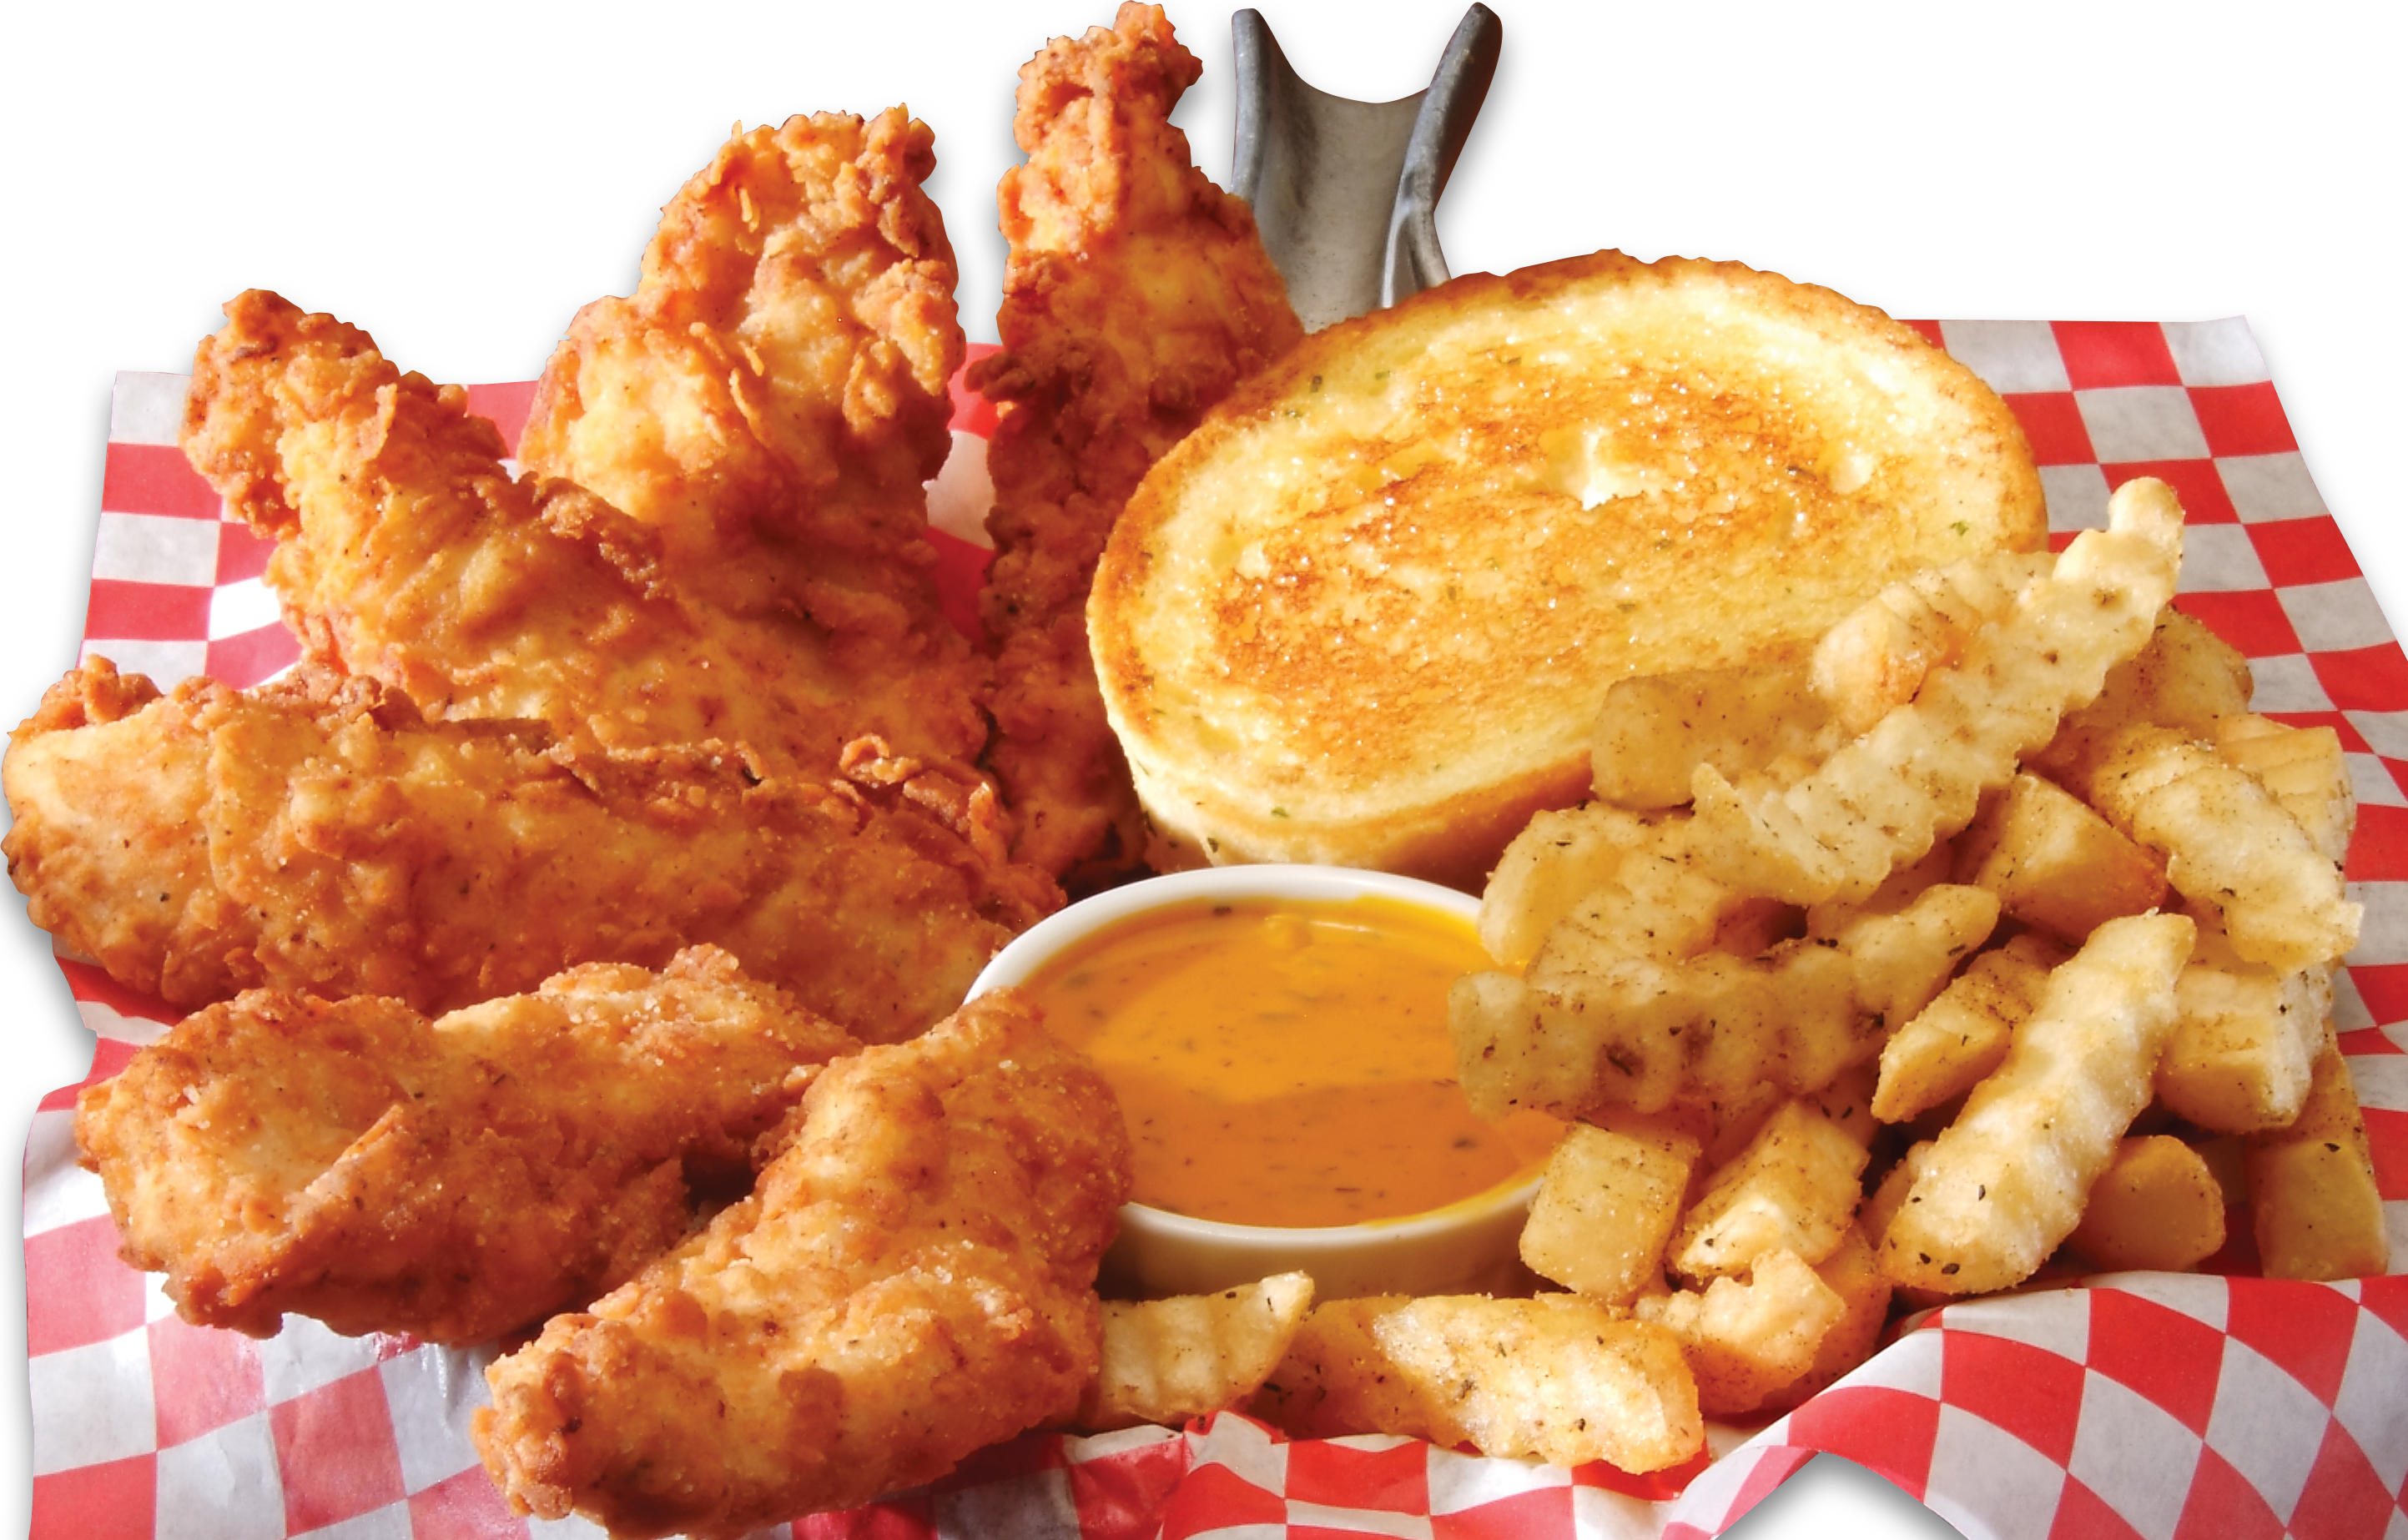 Chicken Tenders - Six hand-breaded tenders marinated in buttermilk and deep fried, served with choice of sauce